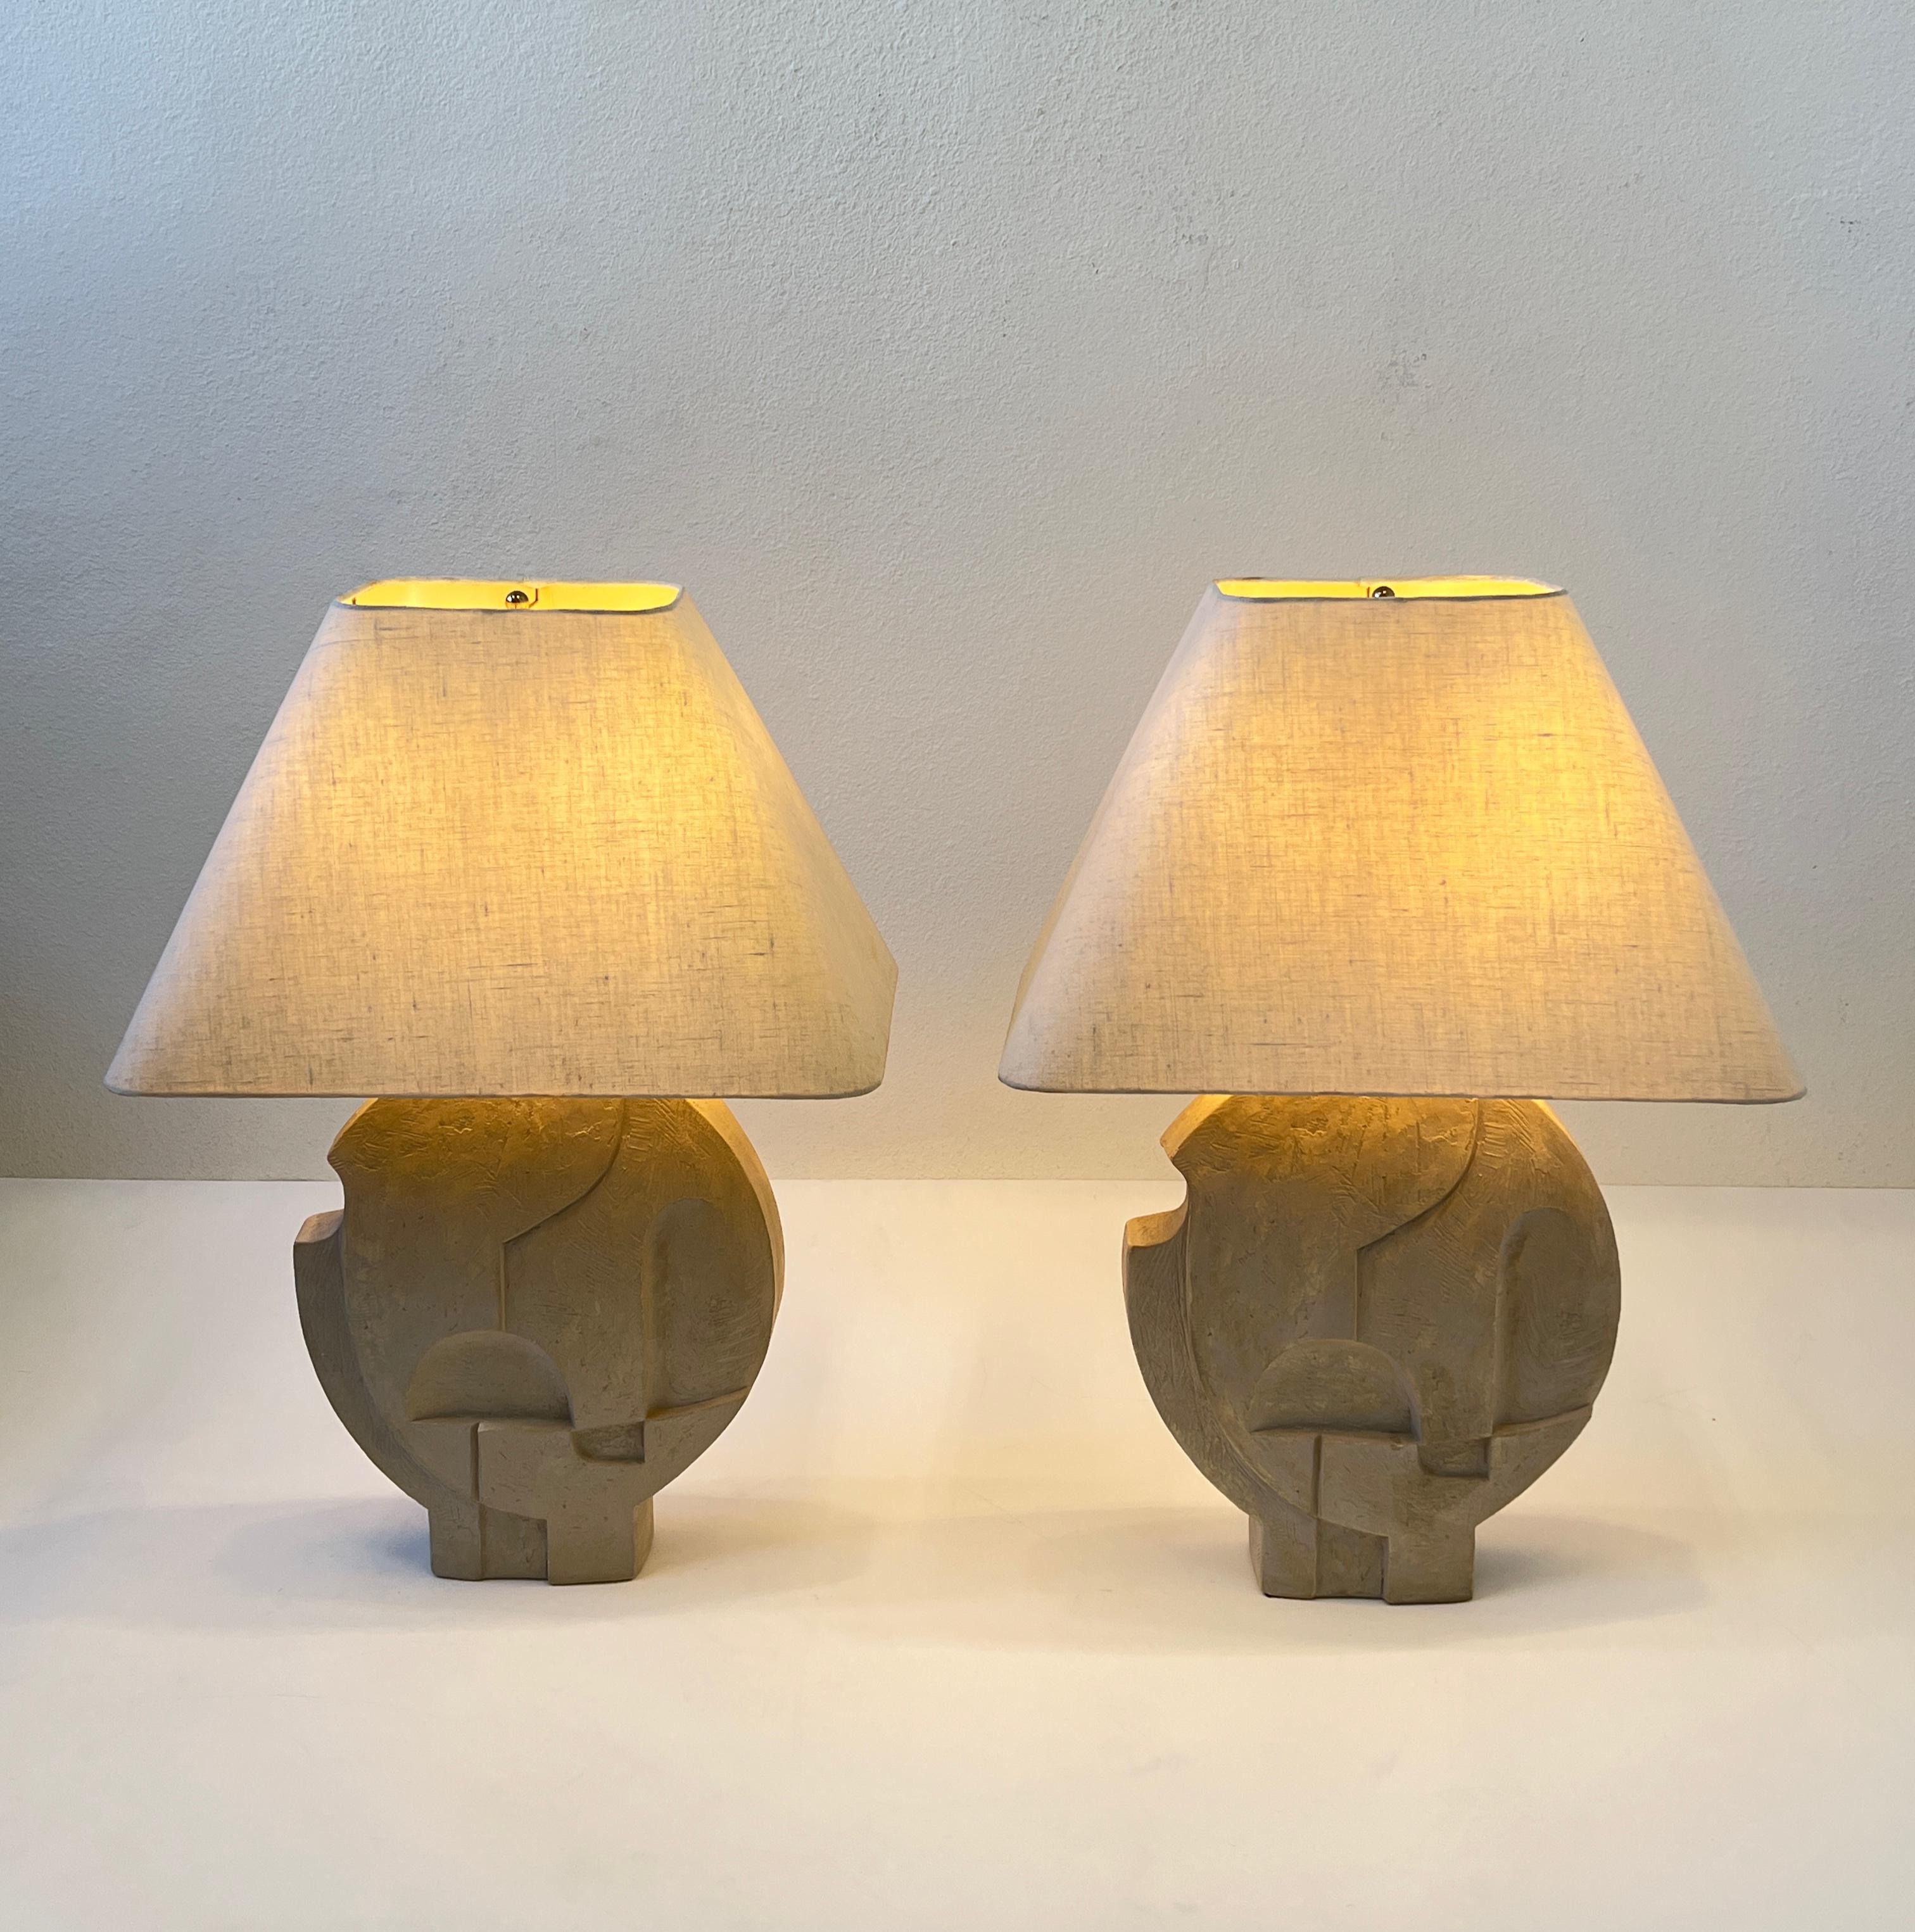 American Pair of Brutalist Plaster and Brass Table Lamps by Casual Lamps of California